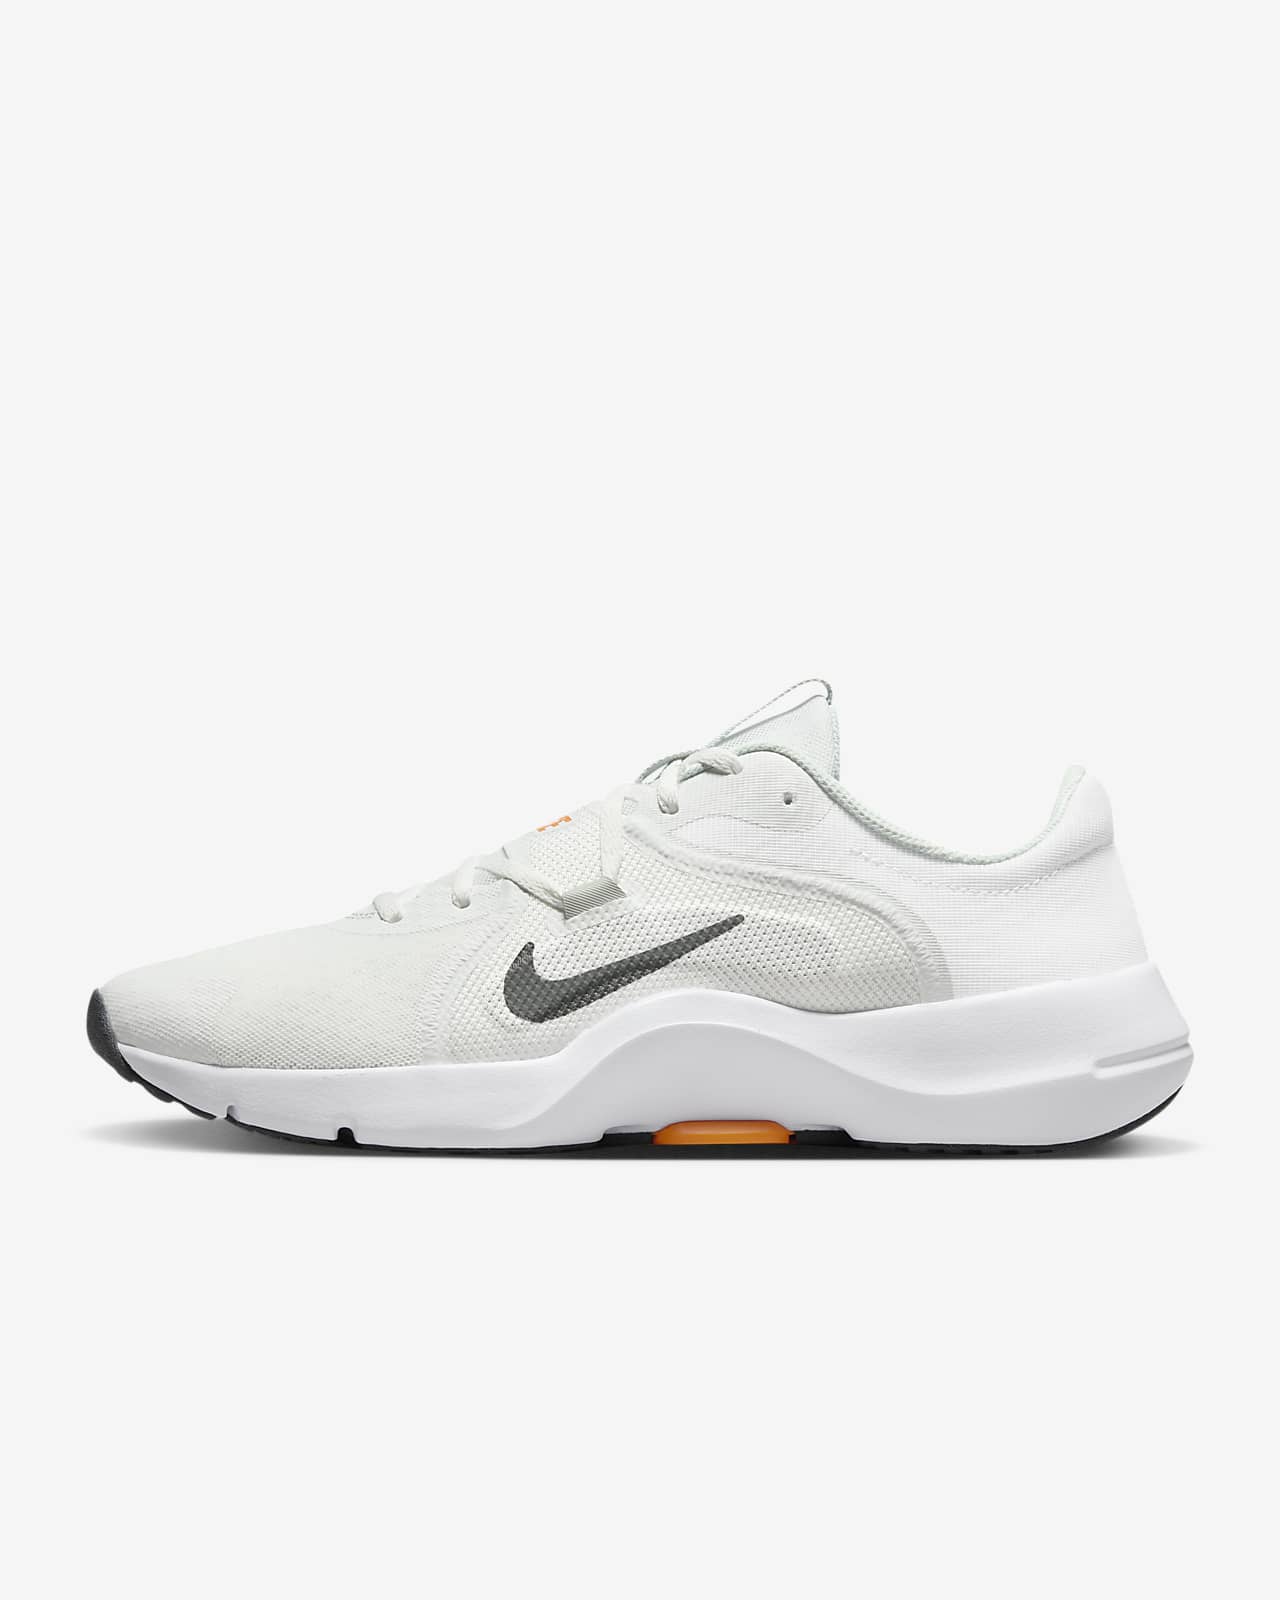 Share 159+ nike gym shoes men best